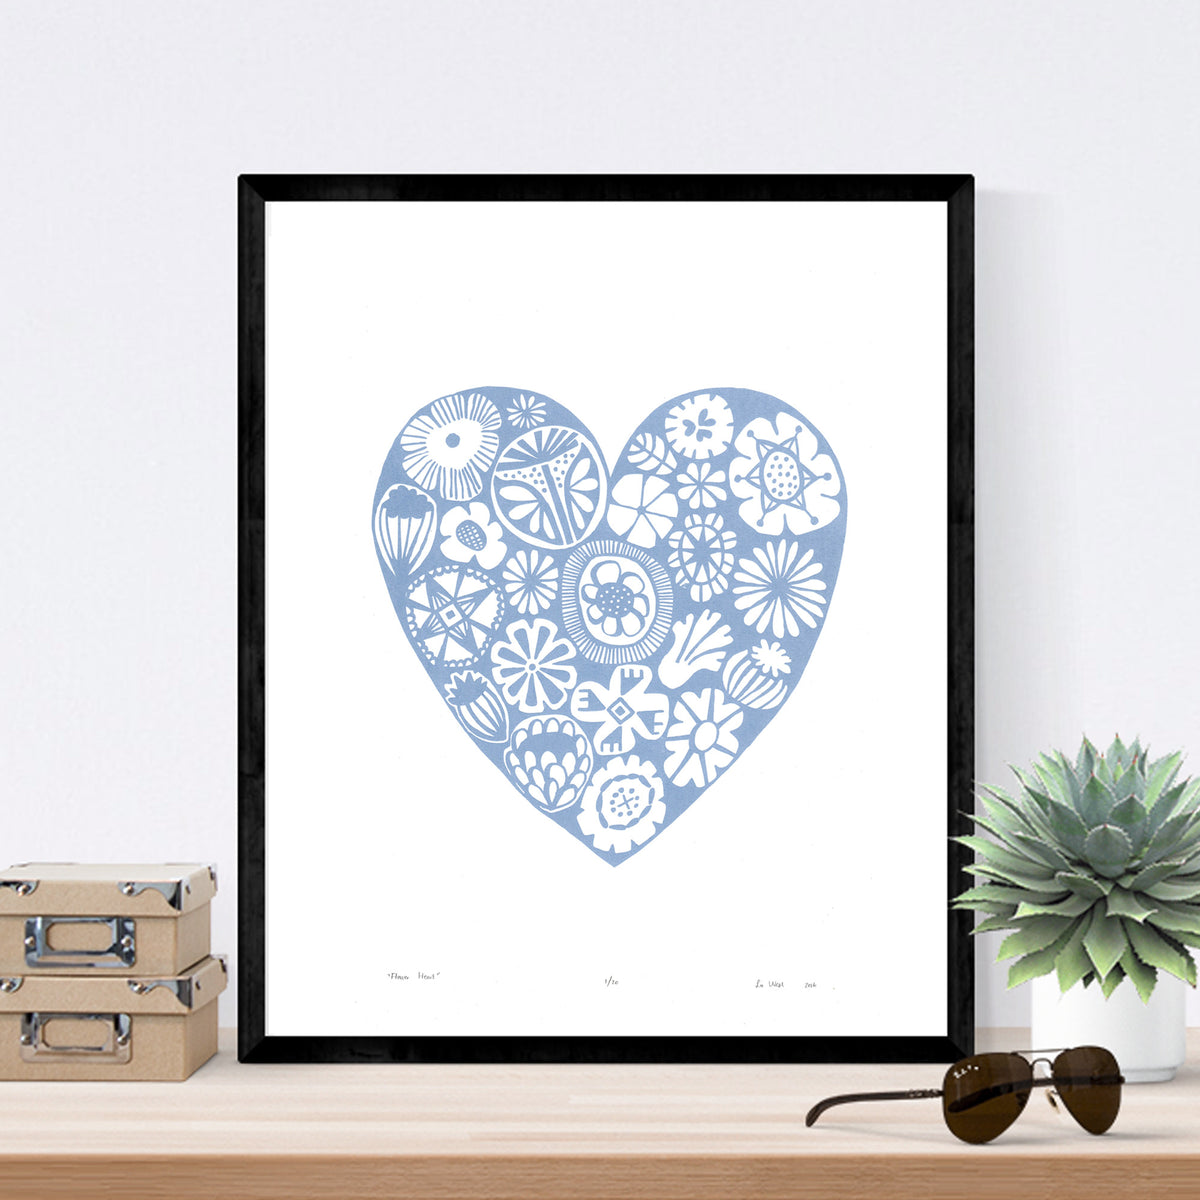 Botanical heart shaped print in pretty pastel serenity blue in a simple Scandinavian style. Inspired by the indigenous Fynbos flowers of South Africa.